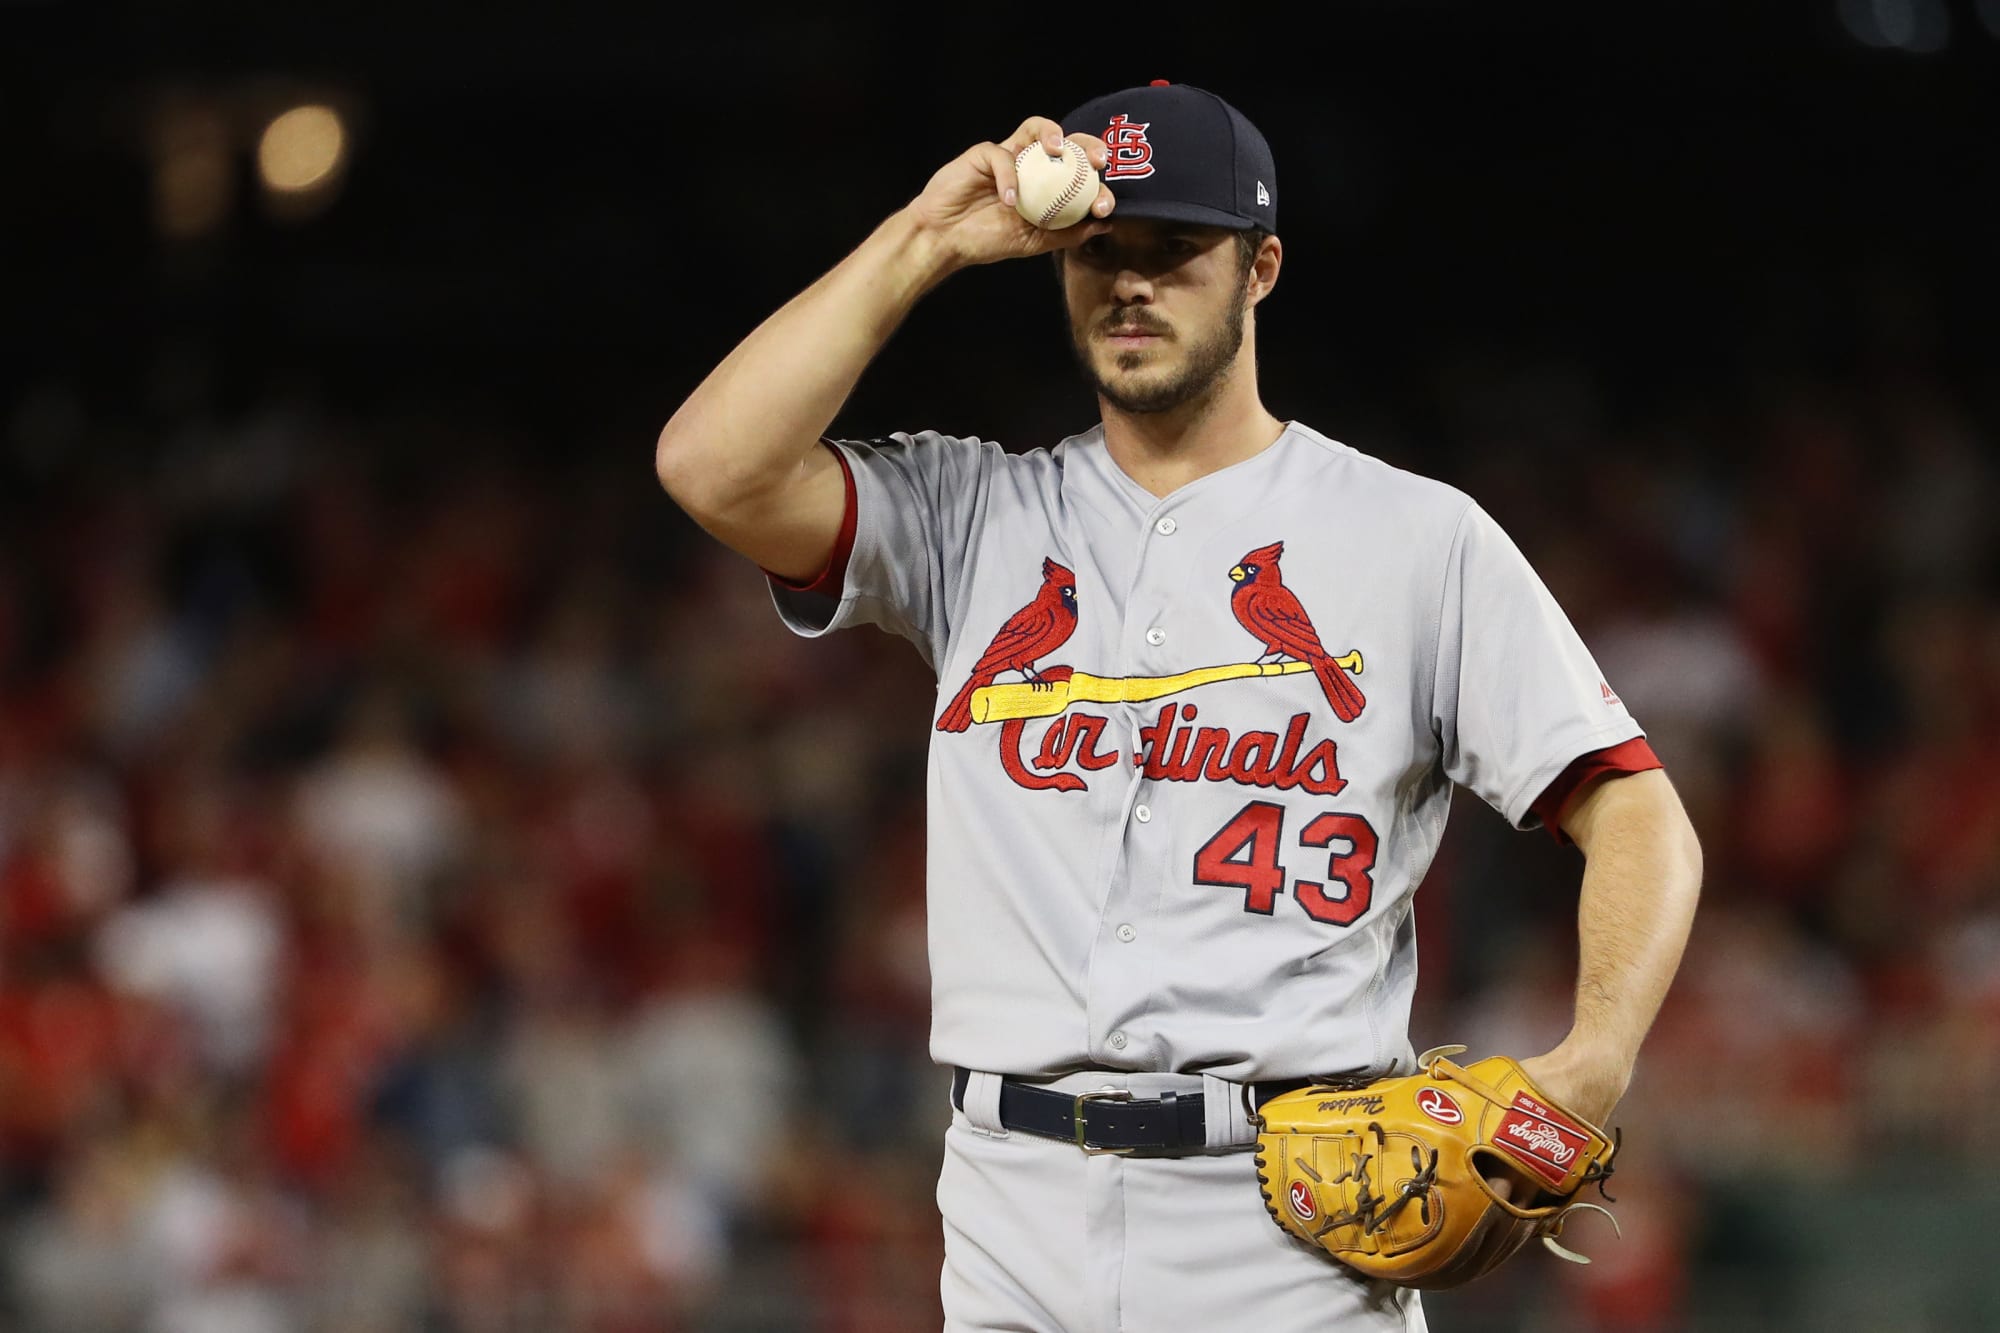 Flipboard: Bold St. Louis Cardinals predictions for the 2020 season